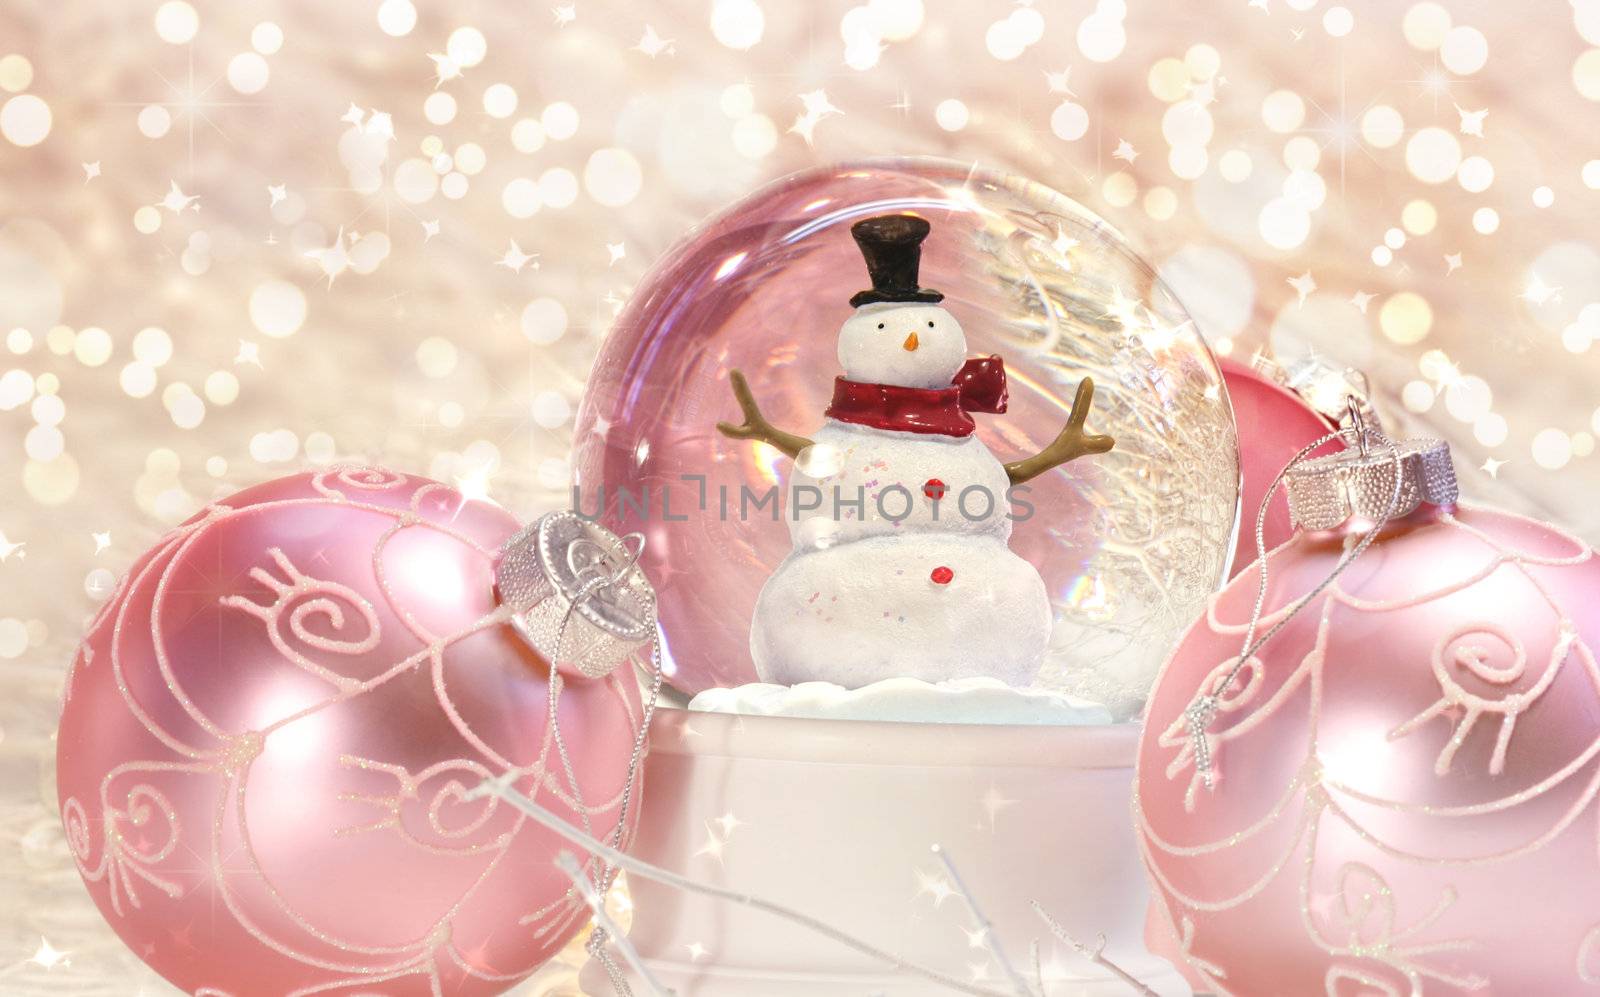 Snow globe with pink ornaments  by Sandralise